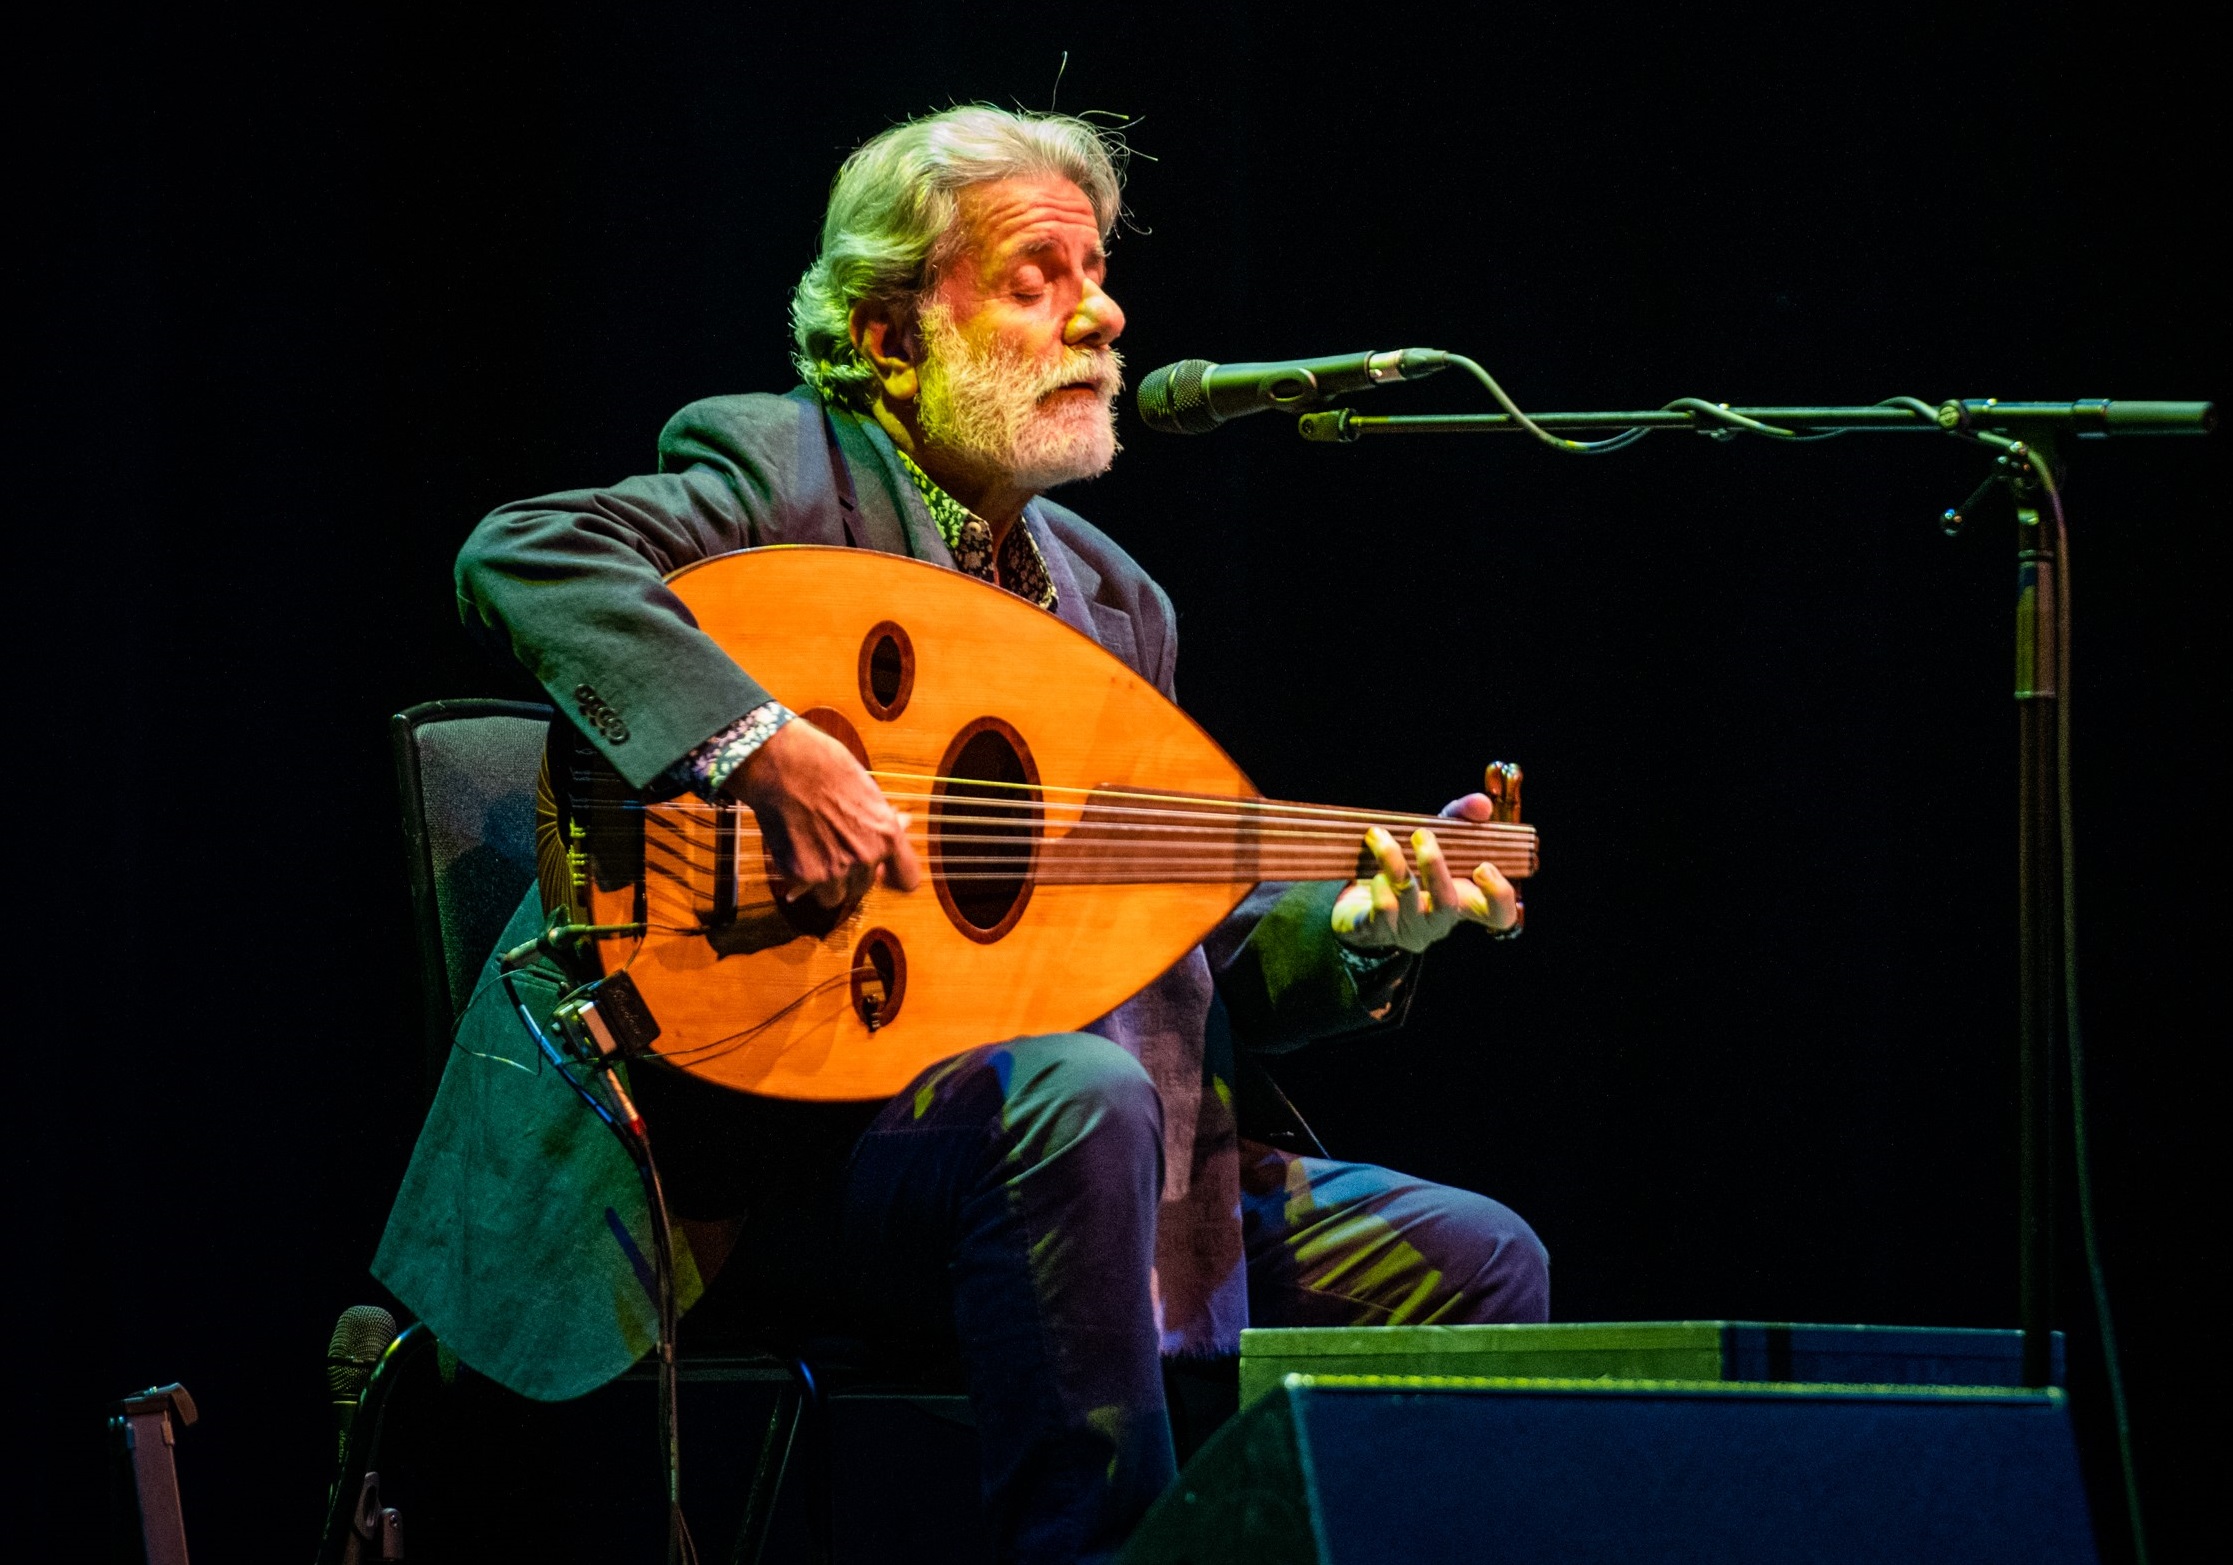 Marcel Khalife performs at the Usher Hall as part of the Edinburgh International Festival's You Are Here series (Credit: Gaelle Beri)